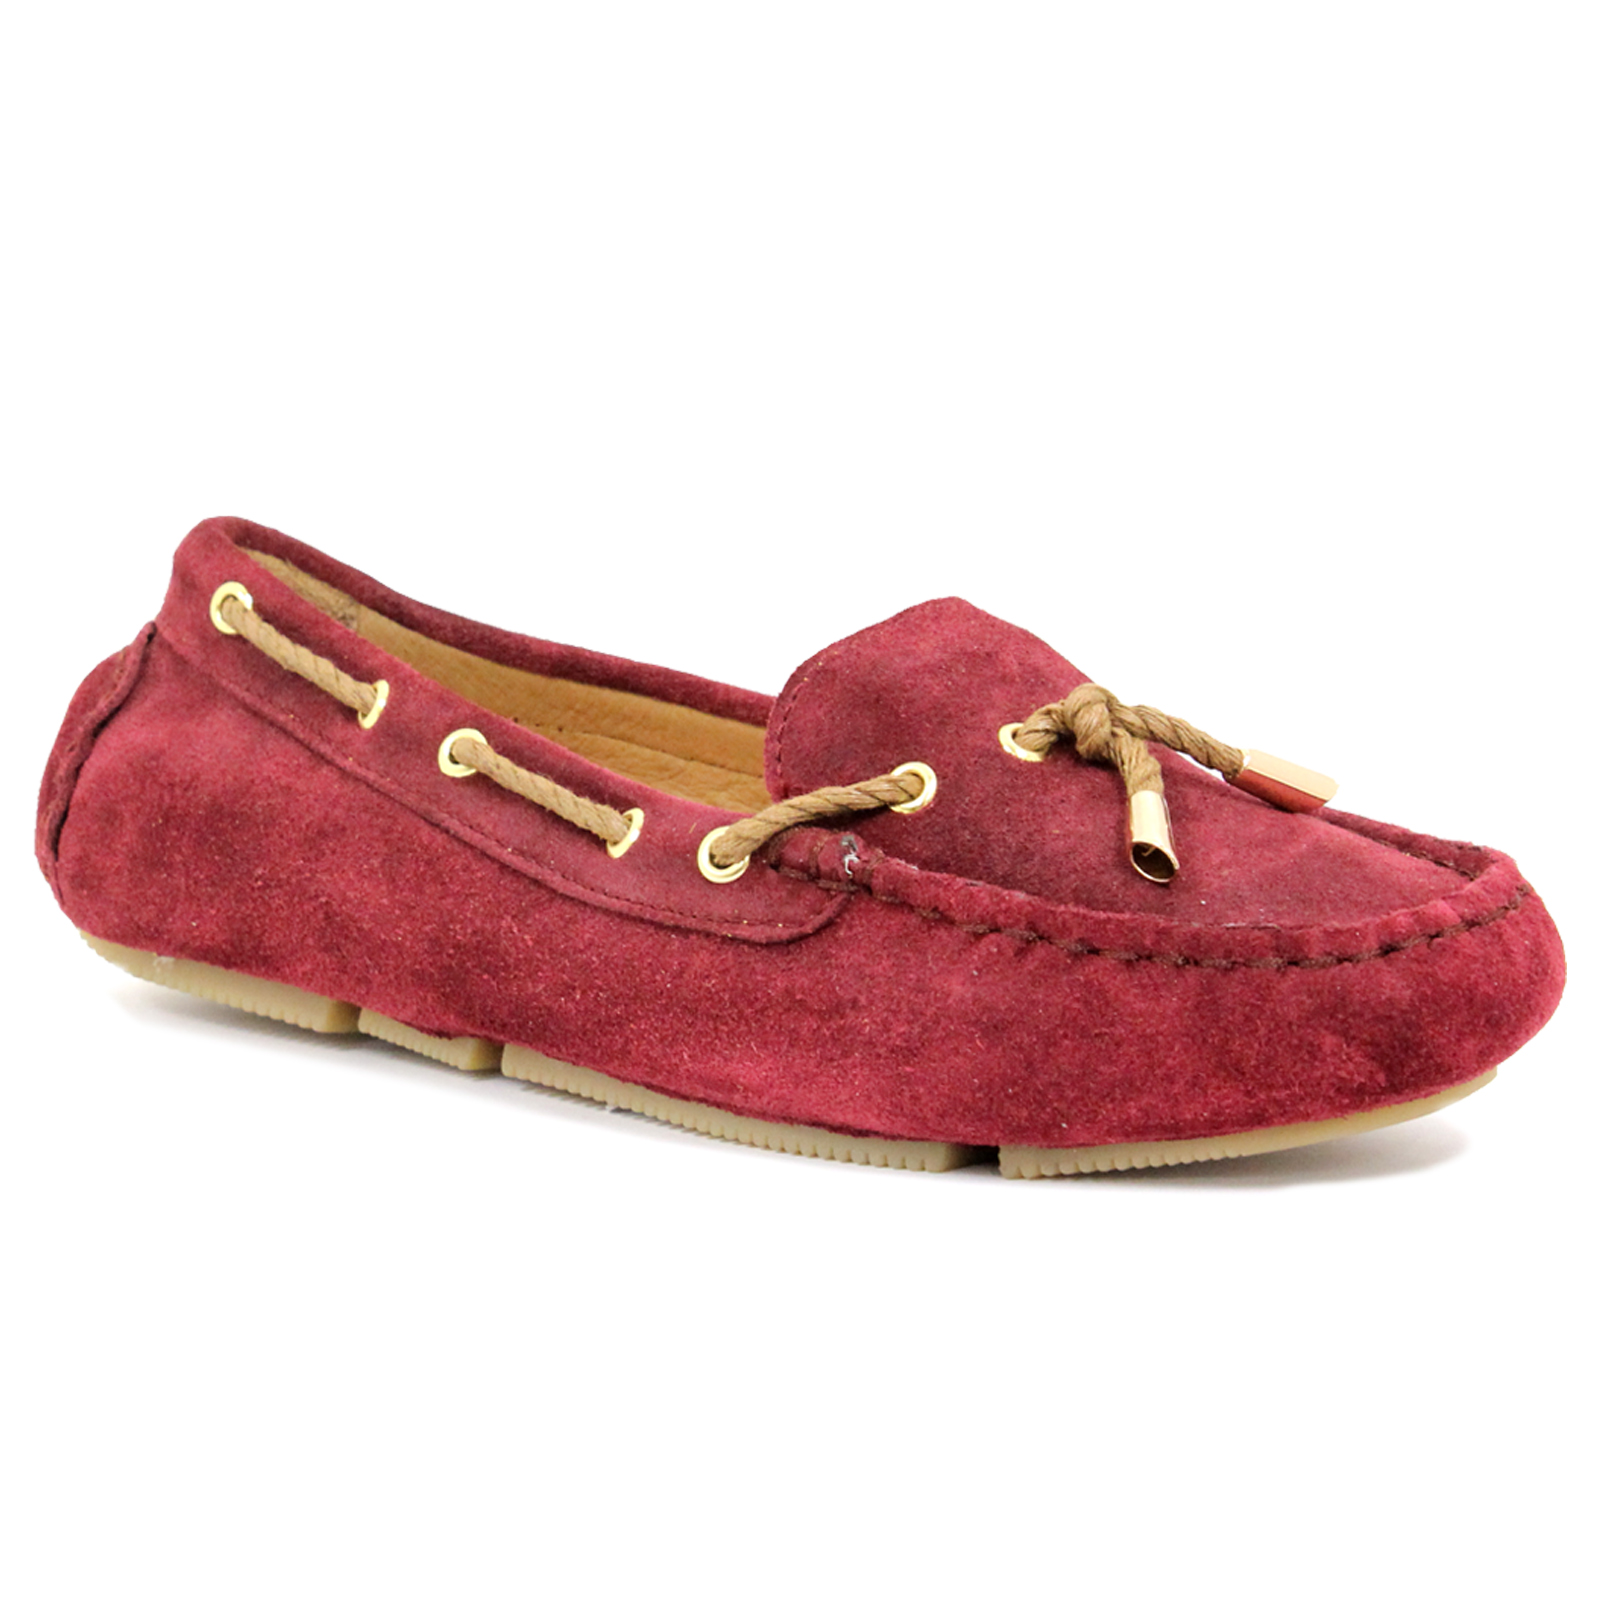 Women's 100% leather Comfort-Arch insole Maroon Elite Moc